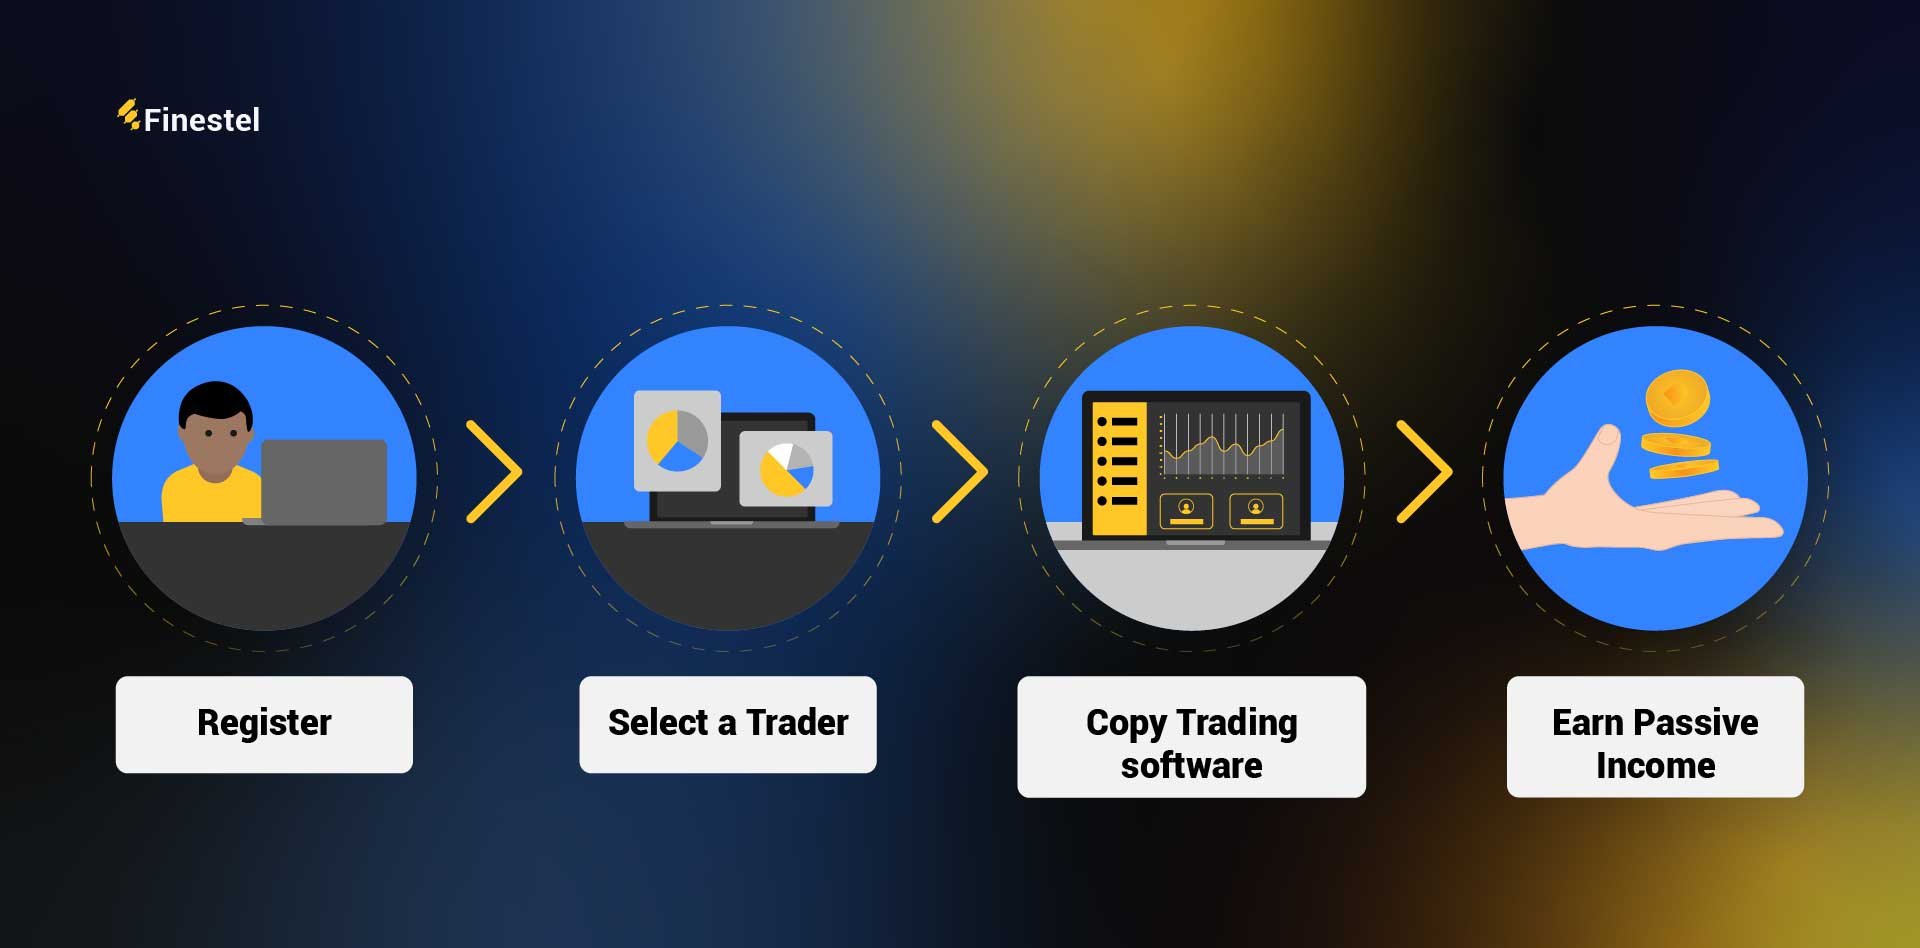 How to Start Copy Trading as an Investor